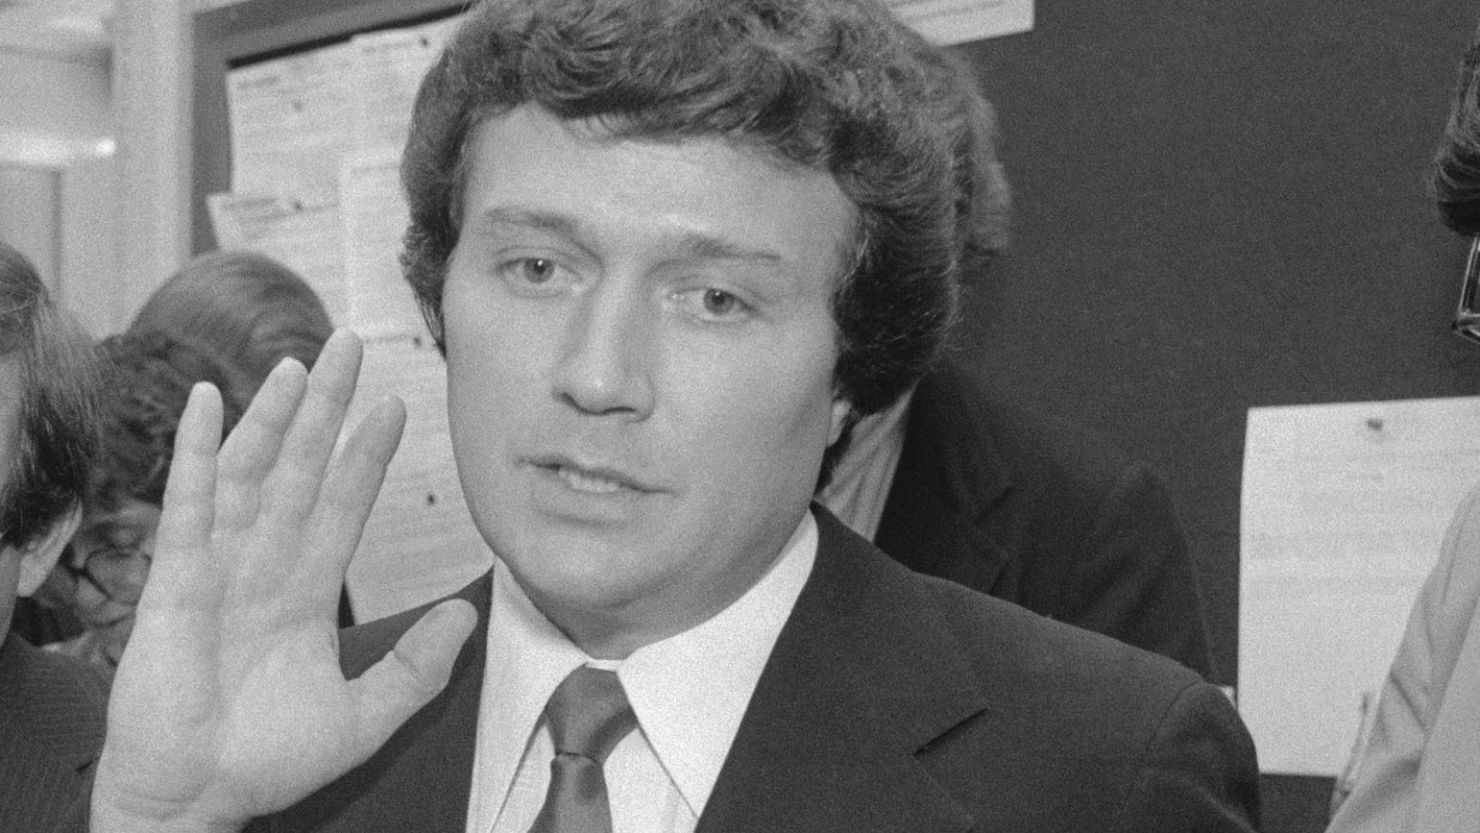 Rep. Michael Myers, D-Pennsylvania, speaks to reporters at the Capitol after he was expelled from Congress by fellow House members for taking a bribe in the FBI Abscam case.